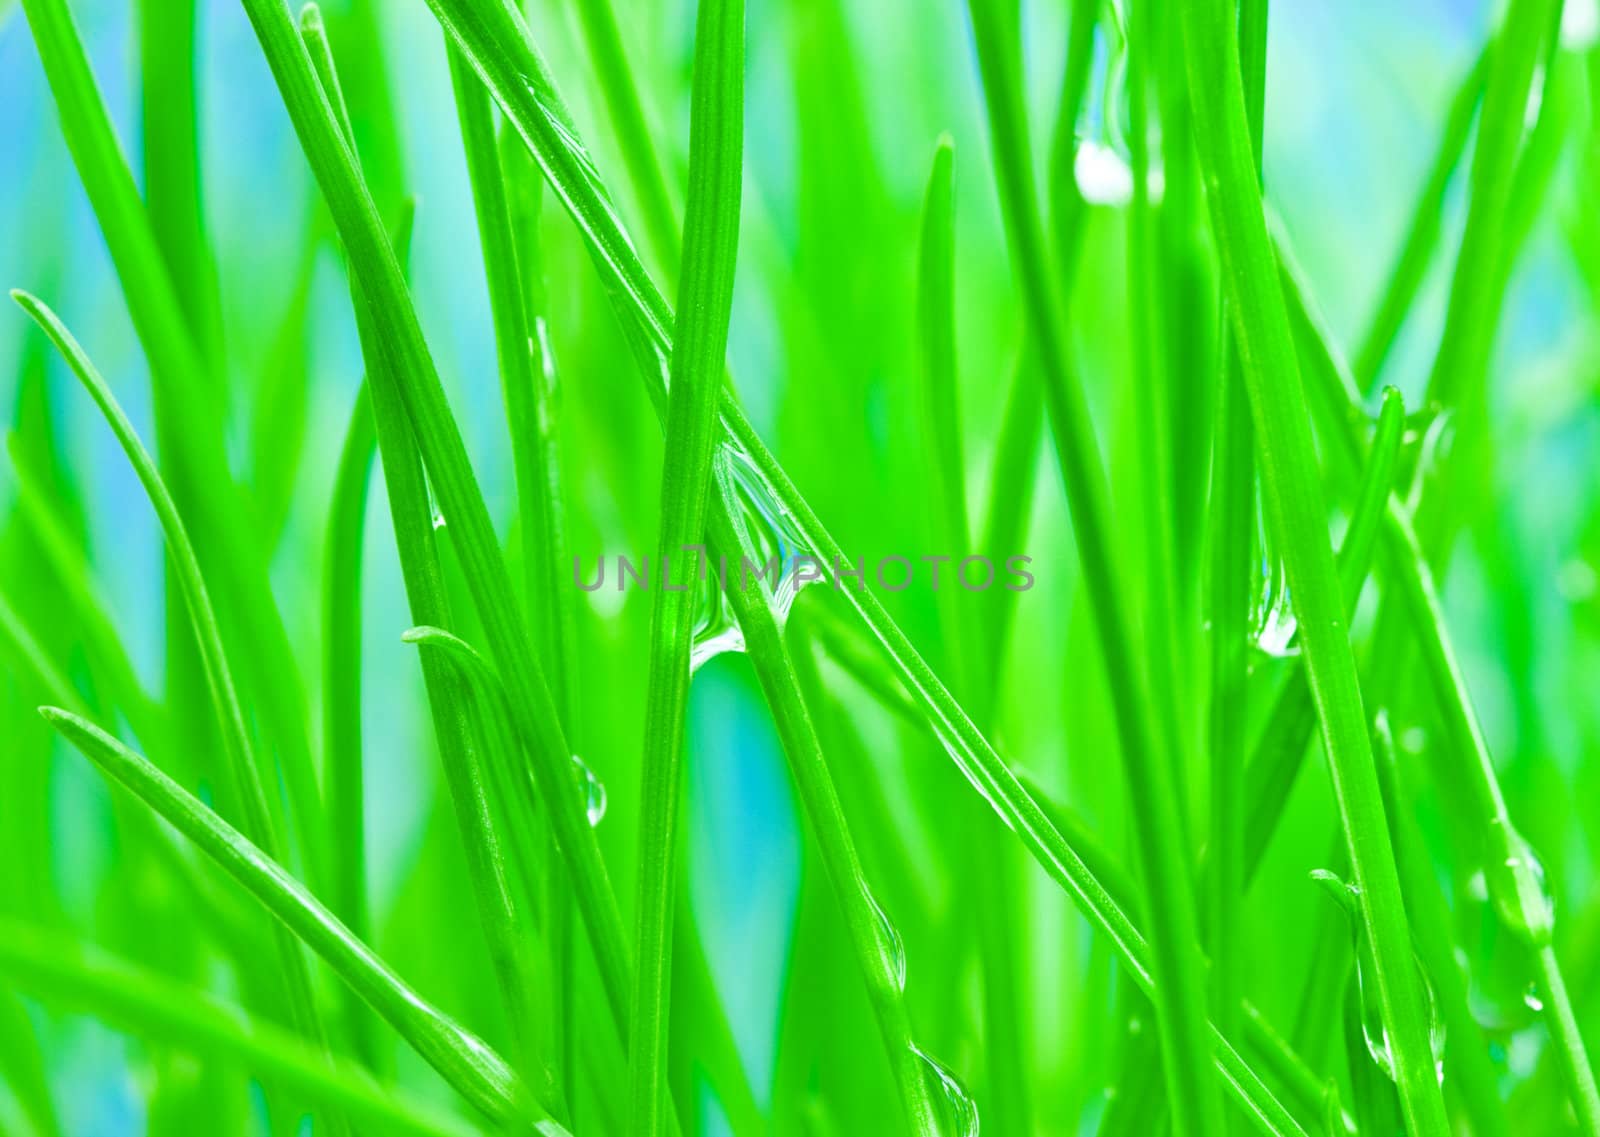 Morning dew on green grass to background by rozhenyuk